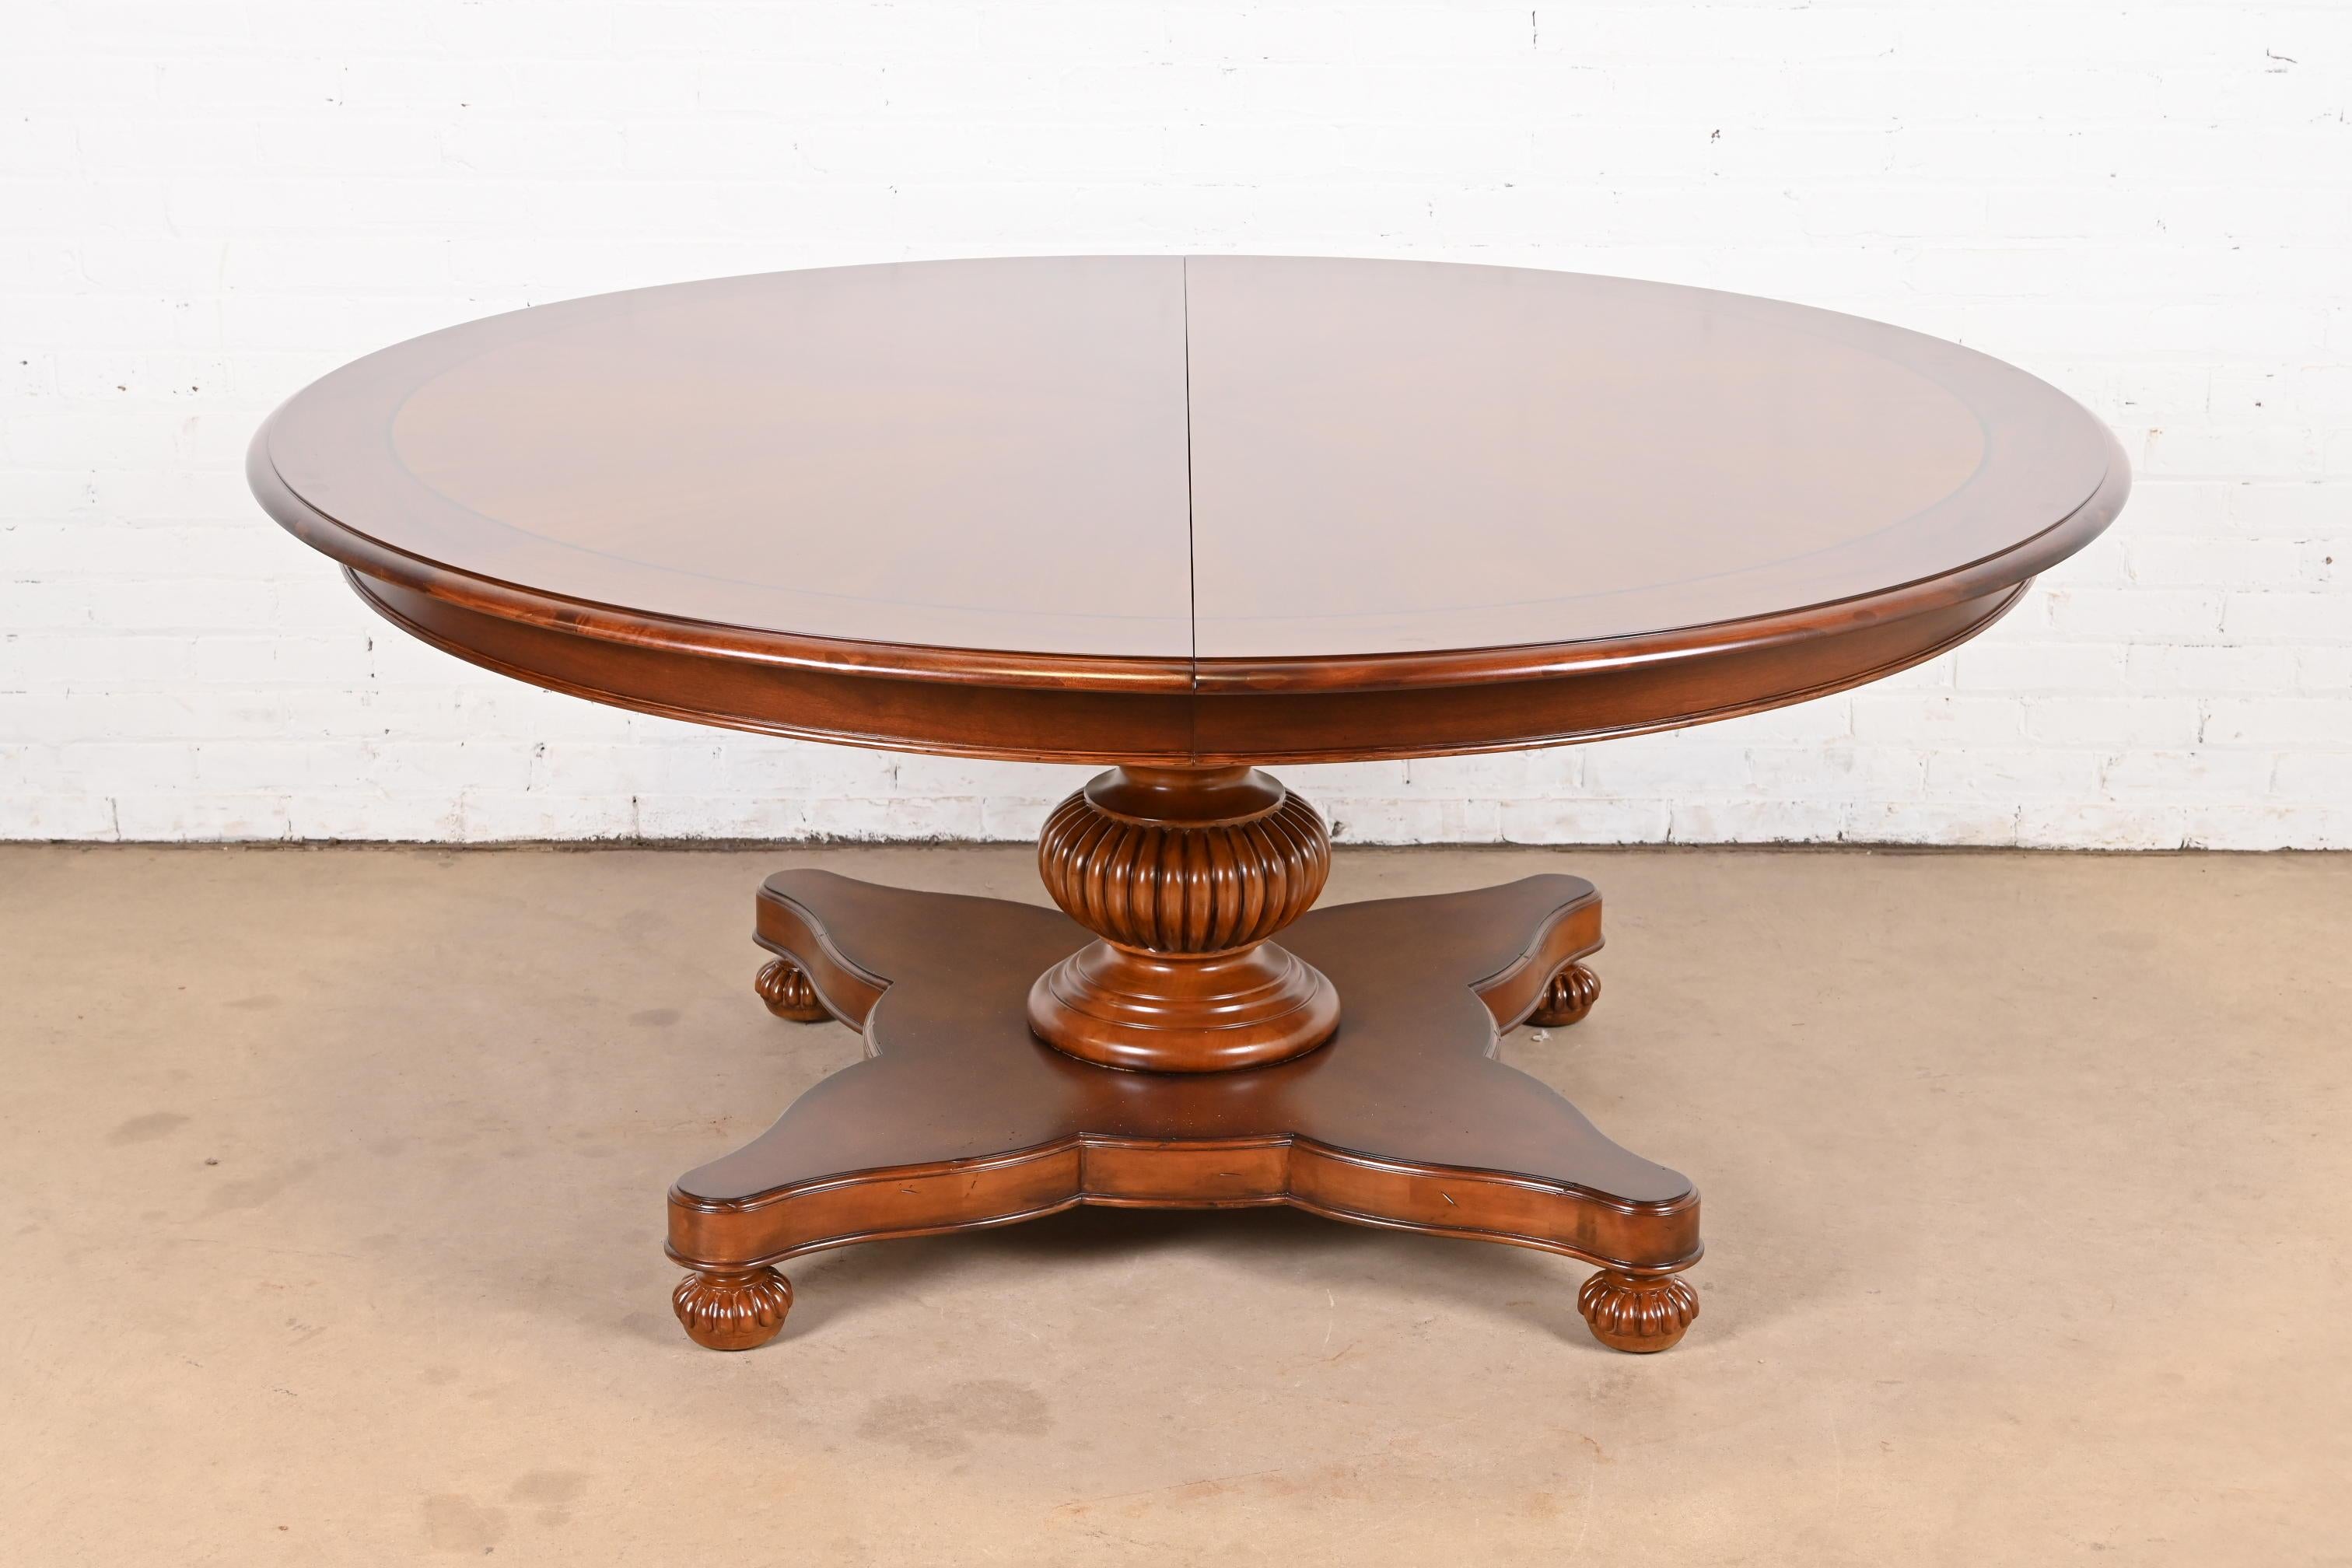 A gorgeous Italian Empire or Neoclassical style round pedestal extension dining table.

By Baker Furniture.

USA, Circa Late 20th Century

Gorgeous inlaid starburst design on top, with carved solid cherry wood pedestal.

Measures: 68